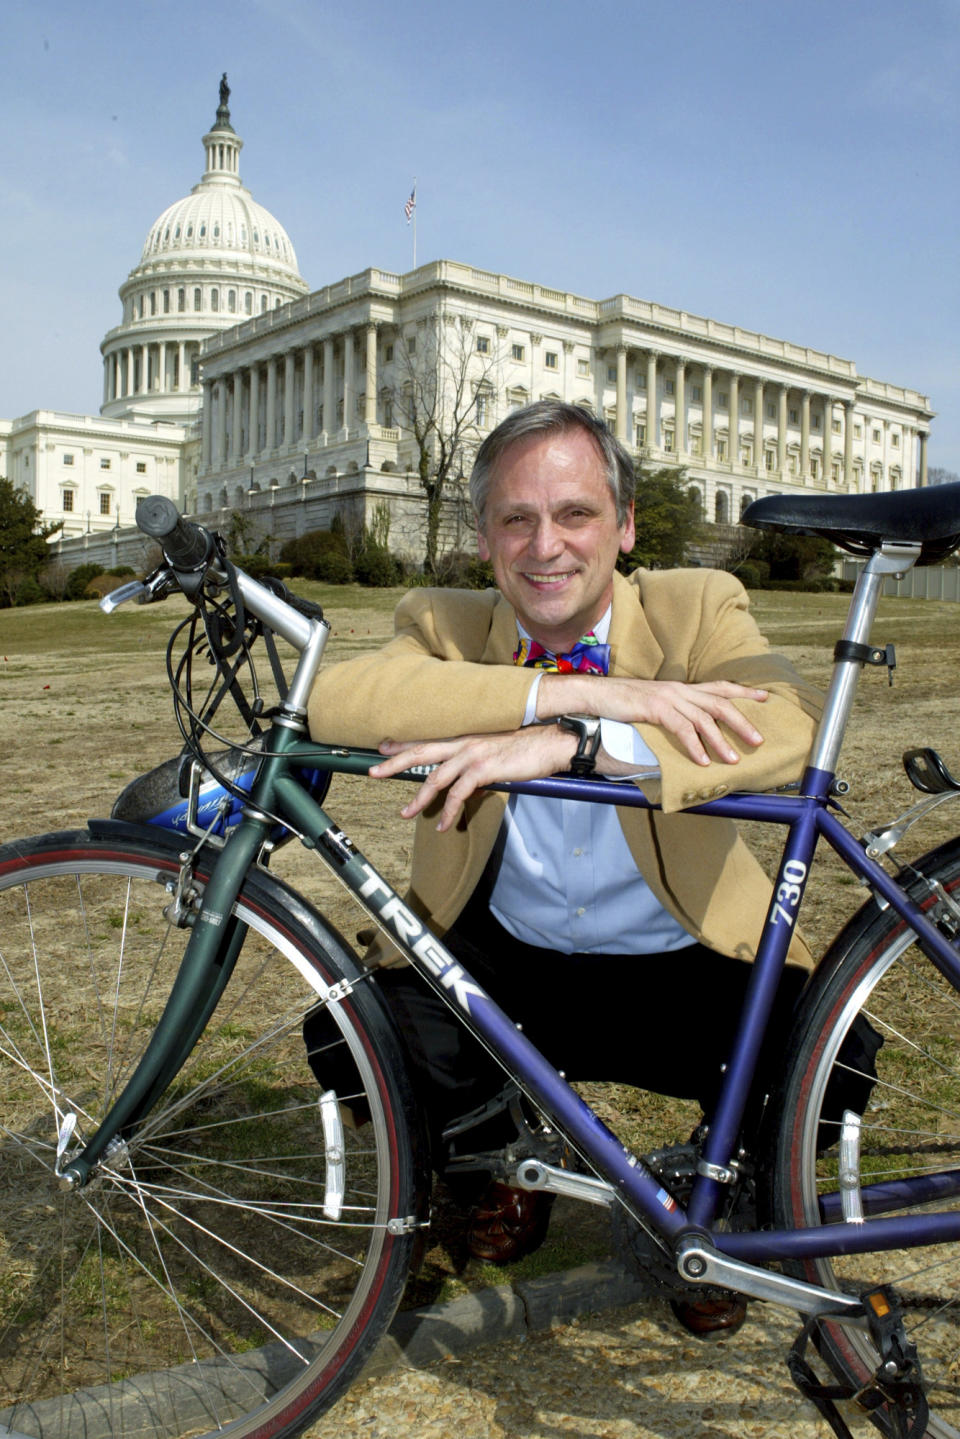 FILE - Rep. Earl Blumenauer, D-Ore., founder and chairman of the bipartisan Congressional Bike Congress poses with his bike on Capitol Hill Thursday, March 13, 2003. Blumenauer, a quirky but deeply respected figure in Oregon politics for decades, has decided not to seek reelection after 27 years in Congress, citing turmoil on Capitol Hill and a desire to be more involved in addressing the challenges facing his hometown of Portland. (AP Photo/Matthew Cavanaugh, File)